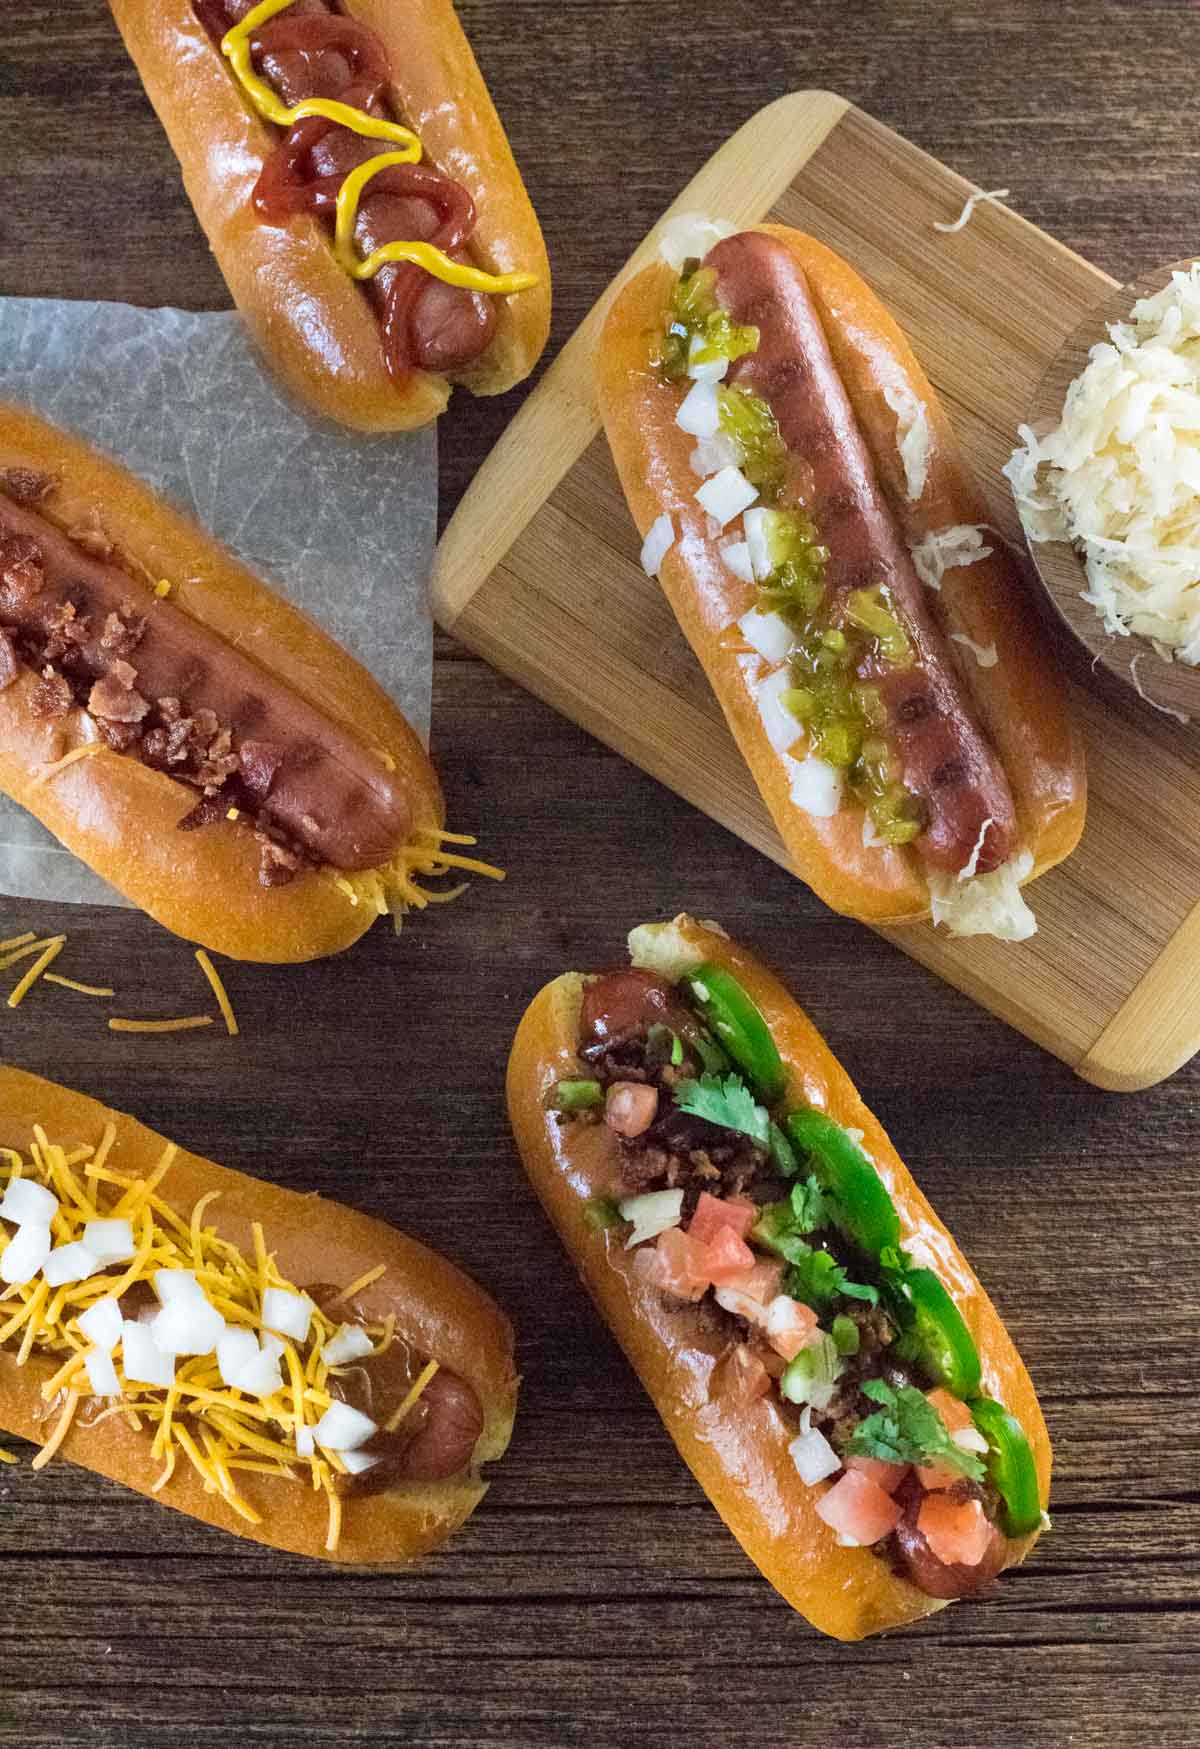 Grilled Link Hot Dogs with Homemade Pickle Relish Recipe